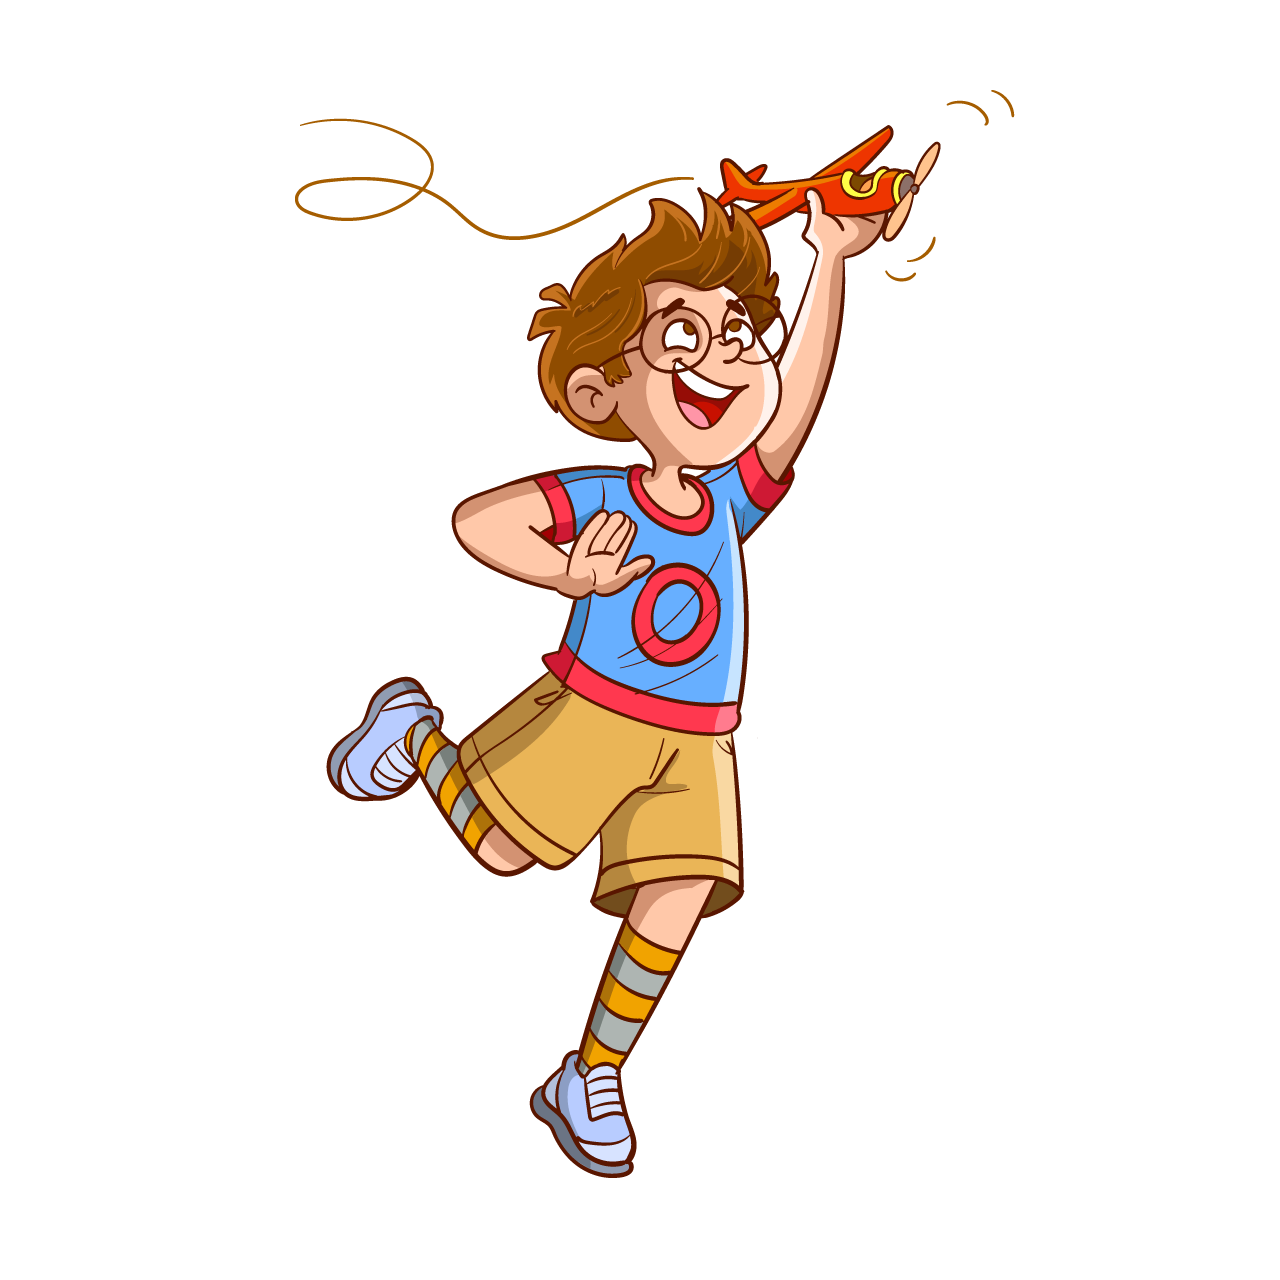 Illustration boy cute shorts playing with toy airplane cartoon